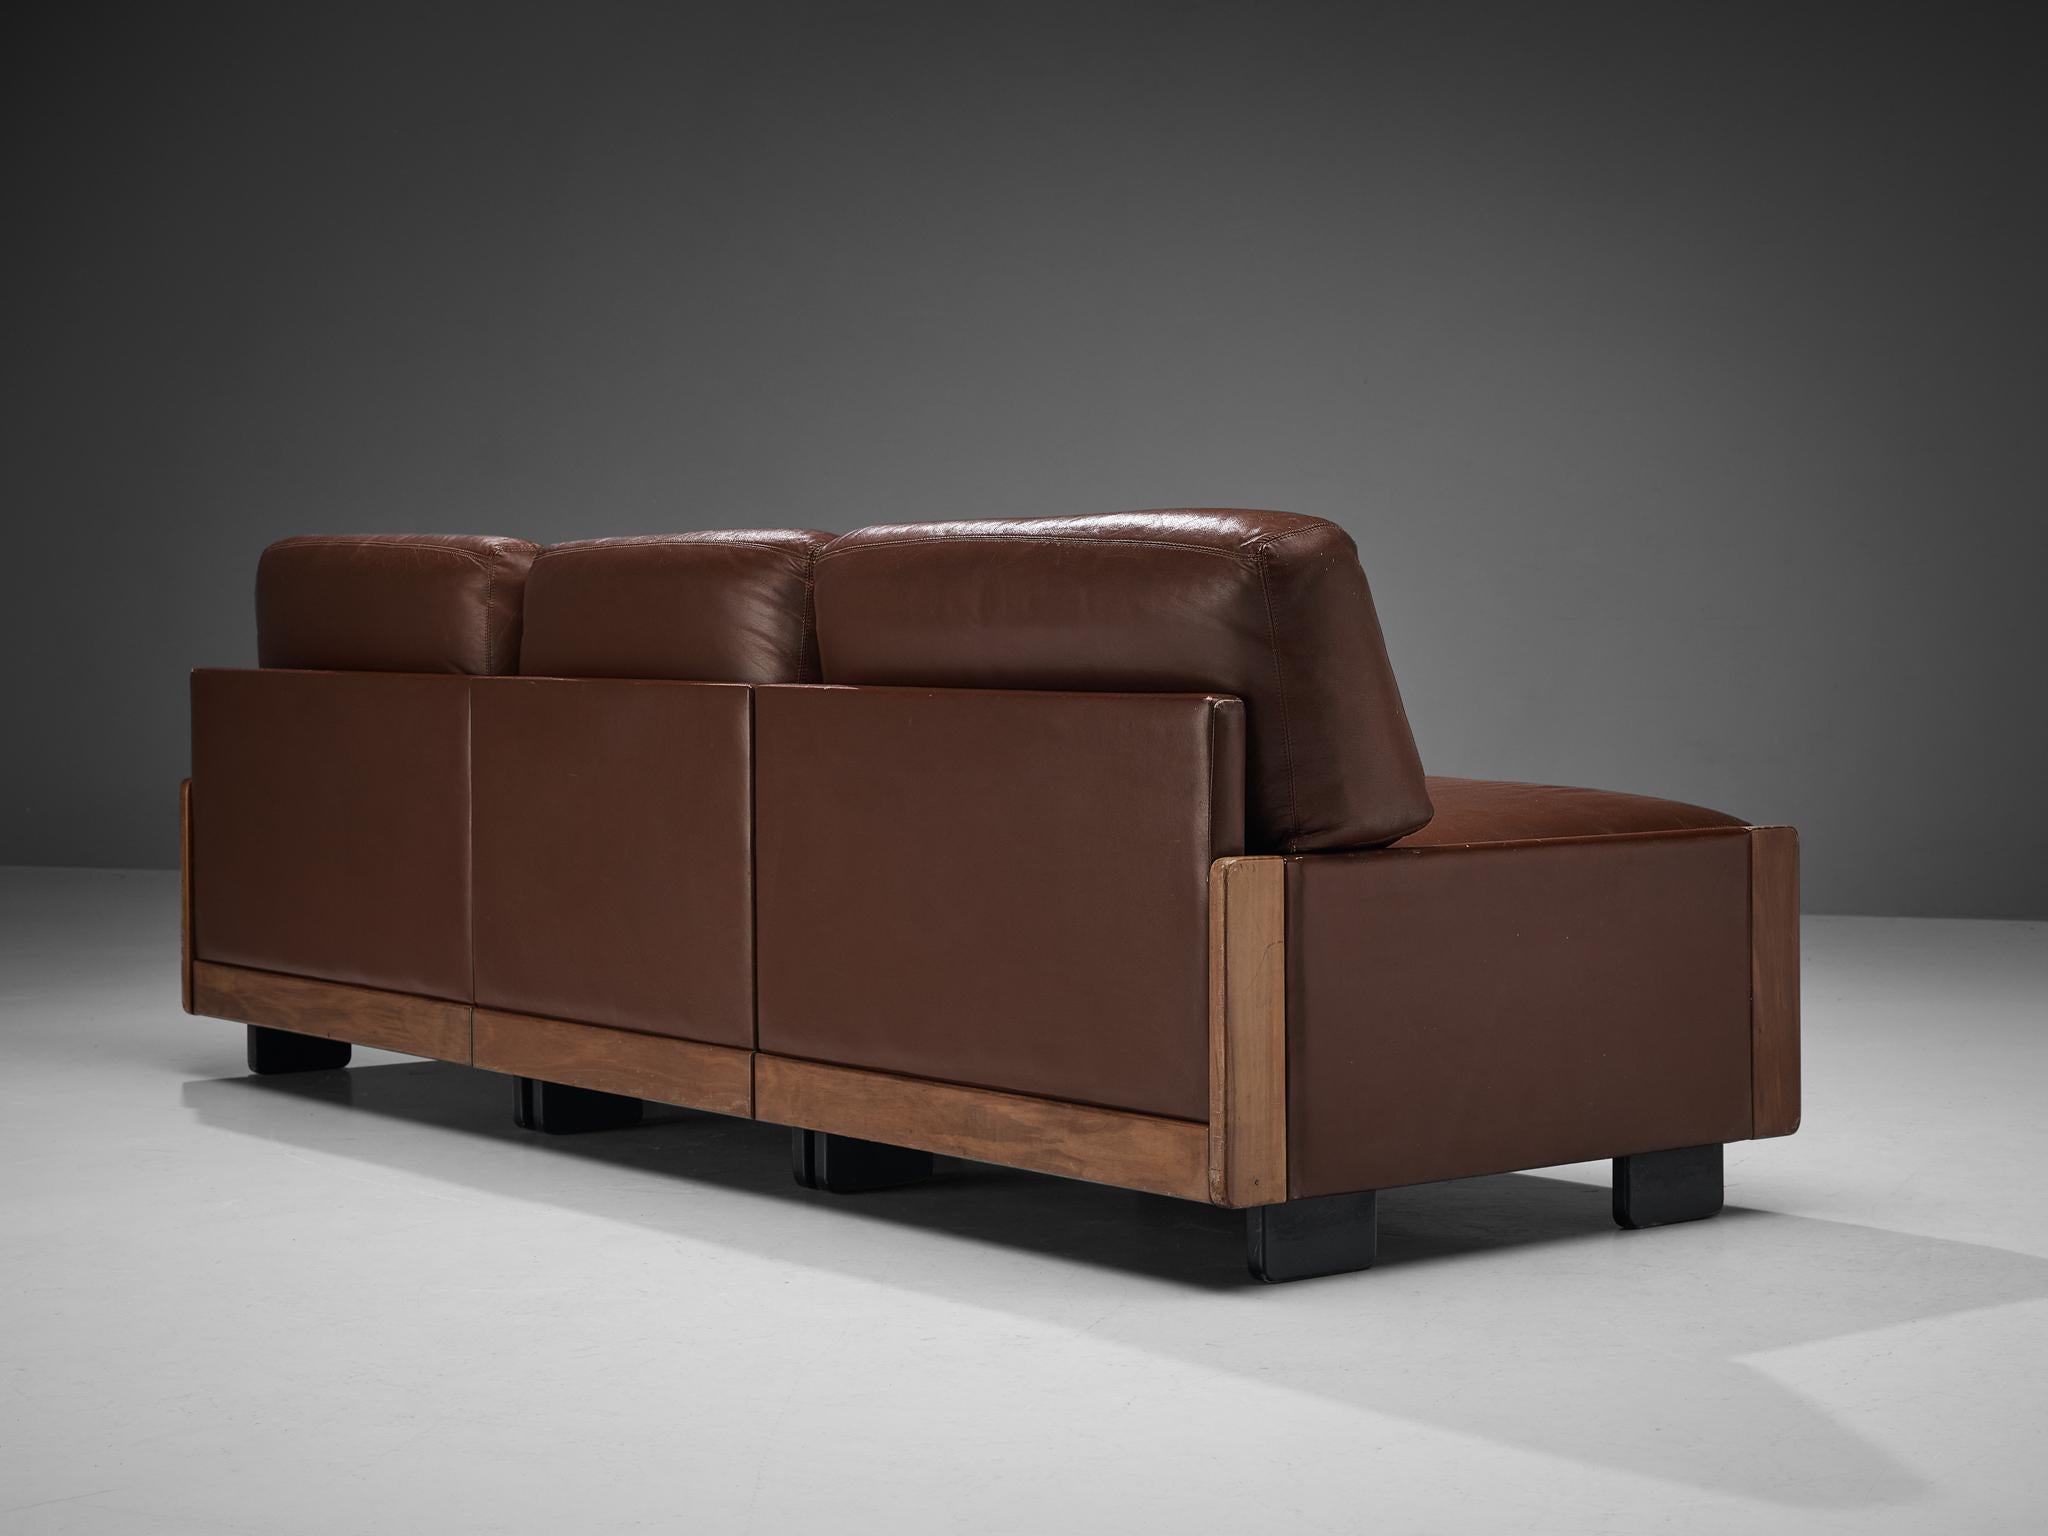 Afra & Tobia Scarpa for Cassina Sofa in Walnut and Brown Leather  For Sale 2